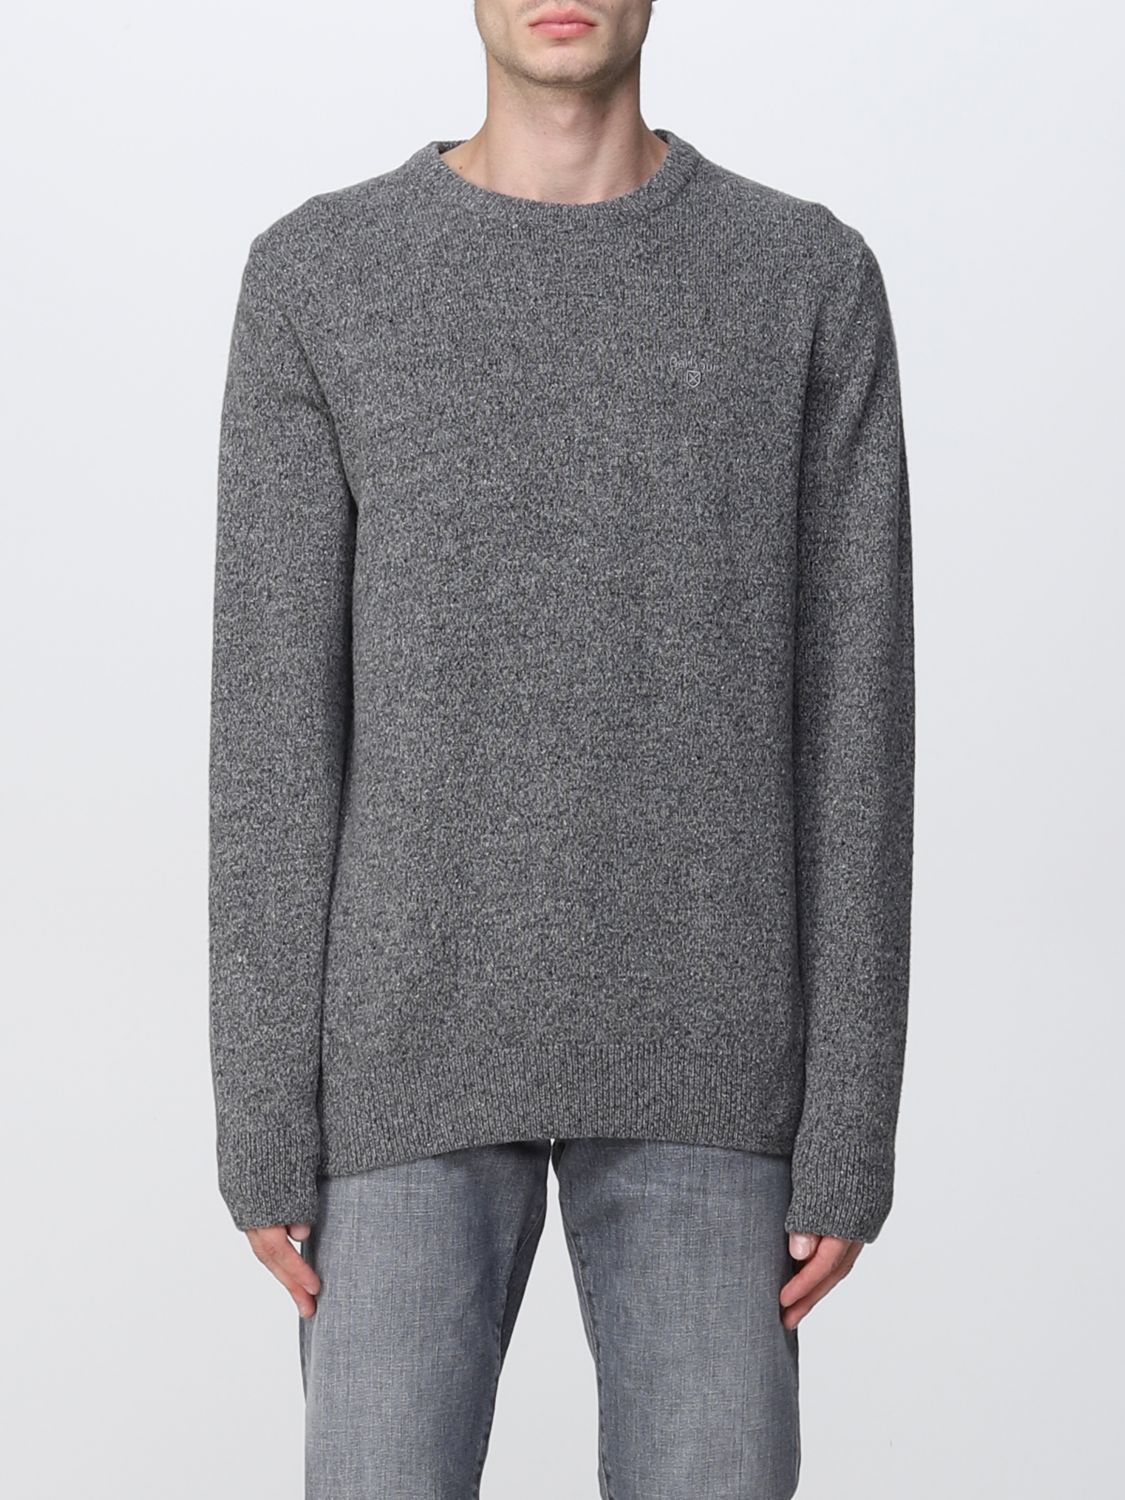 BARBOUR: sweater for man - Grey 1 | Barbour sweater MKN0844 online at ...